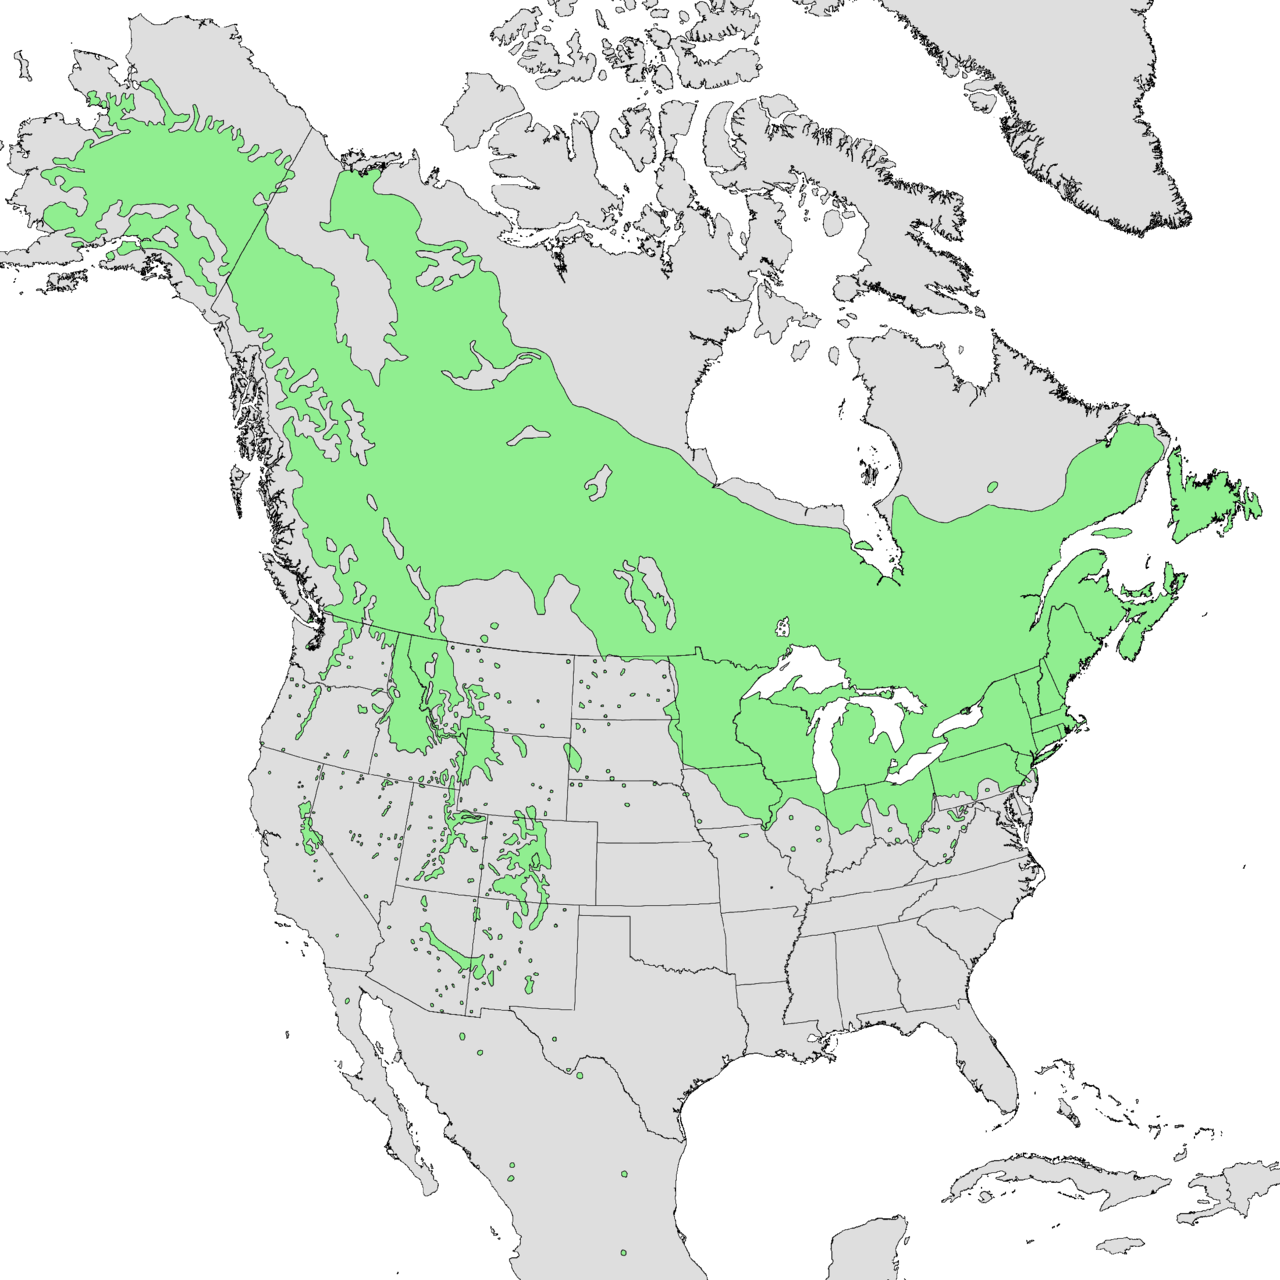 A map showing the range of Populus temuloides in green, it mainly grows in Canada and North Eastern US and Alaska, but there are pockets of growth in Western US and Mexico